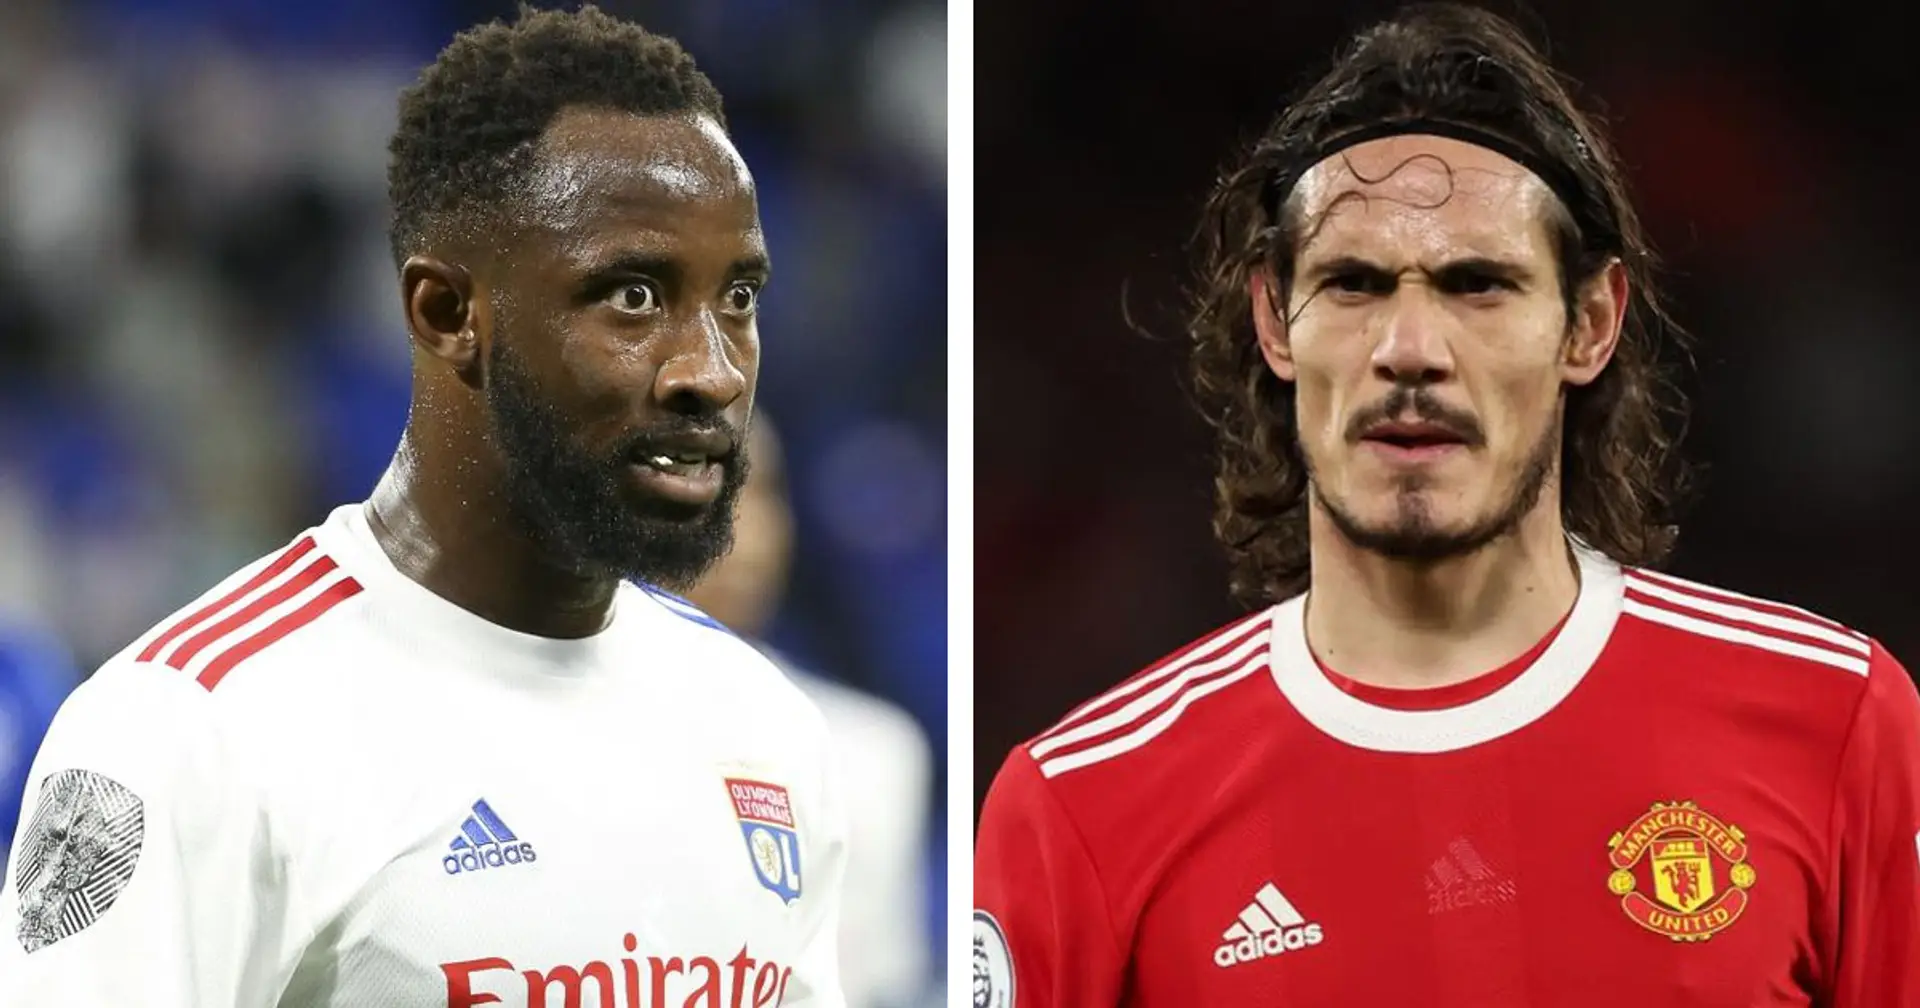 Man United eyeing Lyon striker Moussa Dembele as potential Cavani replacement (reliability: 4 stars)